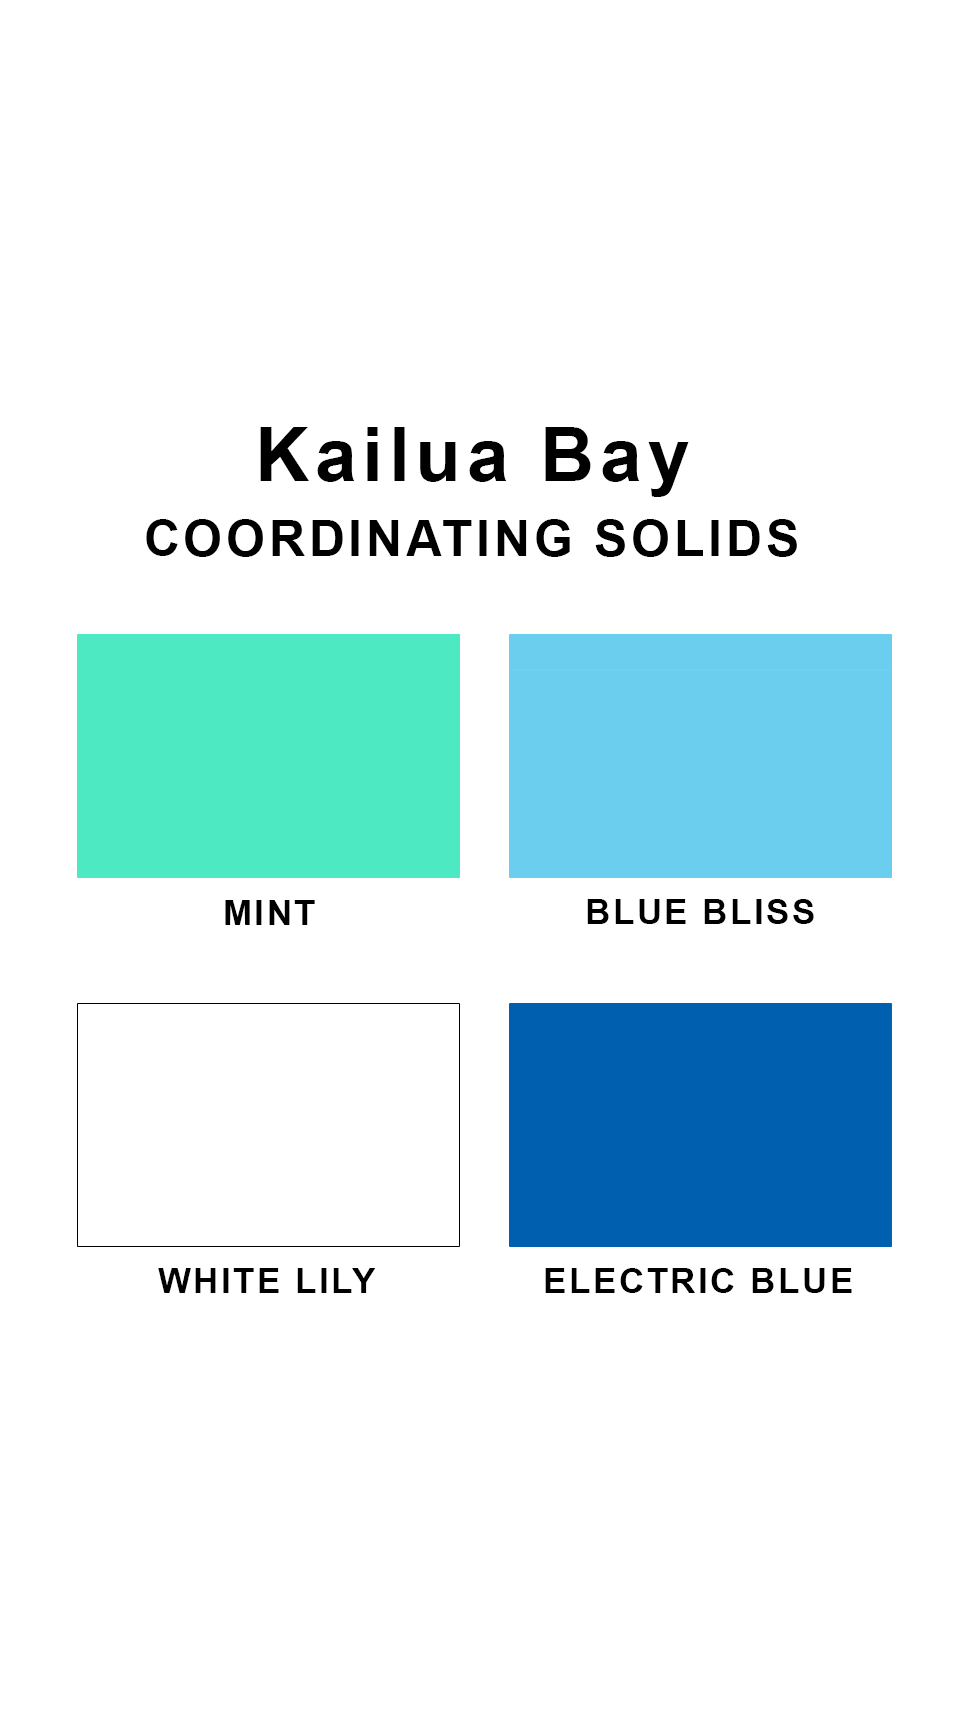 Coordinating solids chart for Sunsets Kailua Bay swimsuit print: Mint, Blue Bliss, White Lily, and Electric Blue